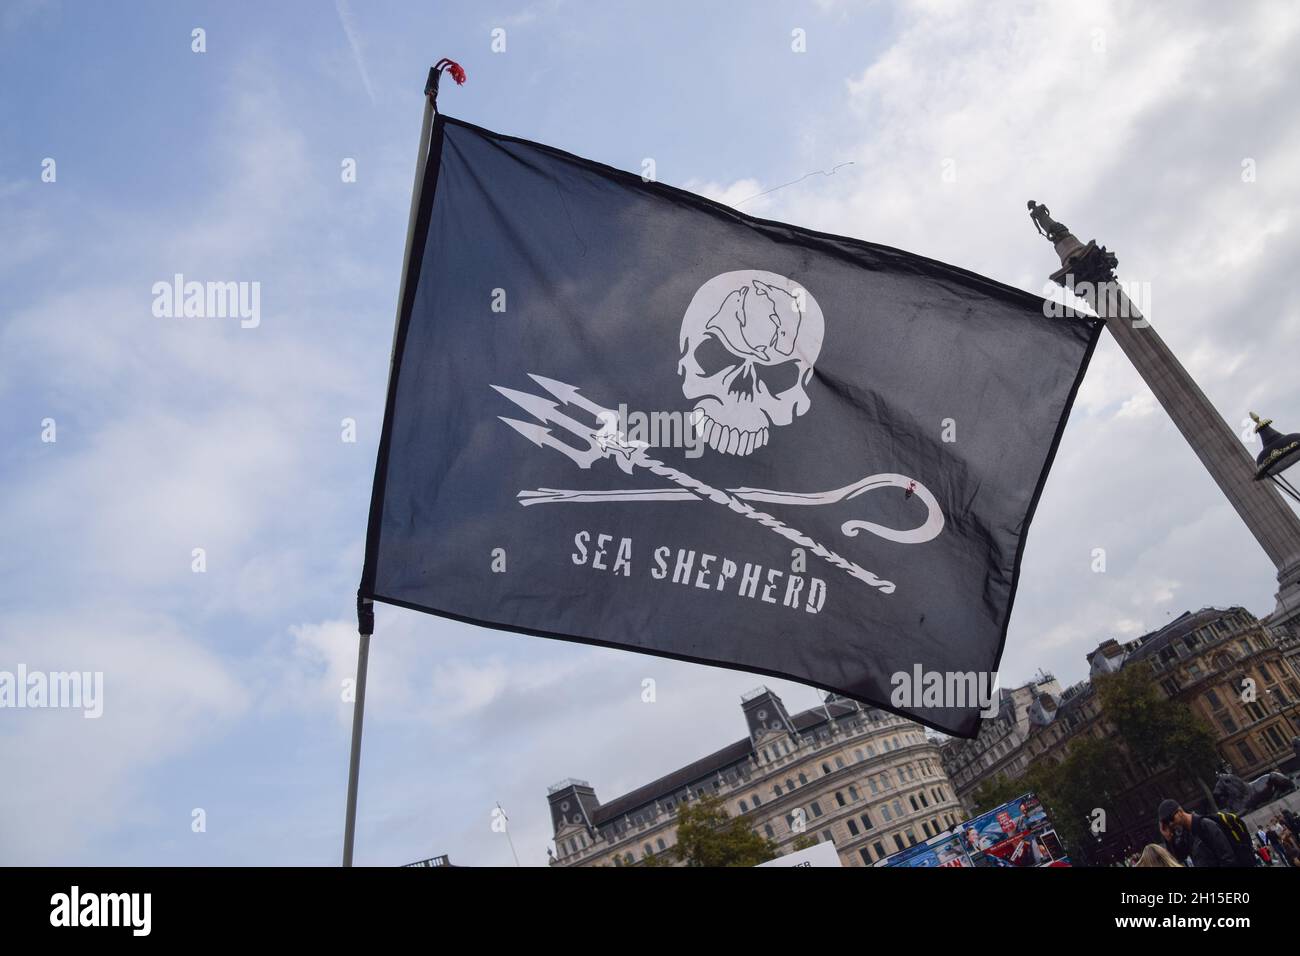 London, UK. 16th Oct, 2021. A Sea Shepherd flag is seen during the demonstration in Trafalgar Square.Members of marine conservation organization Sea Shepherd and other activists marched through Westminster, calling for an end to the slaughter of dolphins in Faroe Islands and Taiji, Japan. (Photo by Vuk Valcic/SOPA Images/Sipa USA) Credit: Sipa USA/Alamy Live News Stock Photo